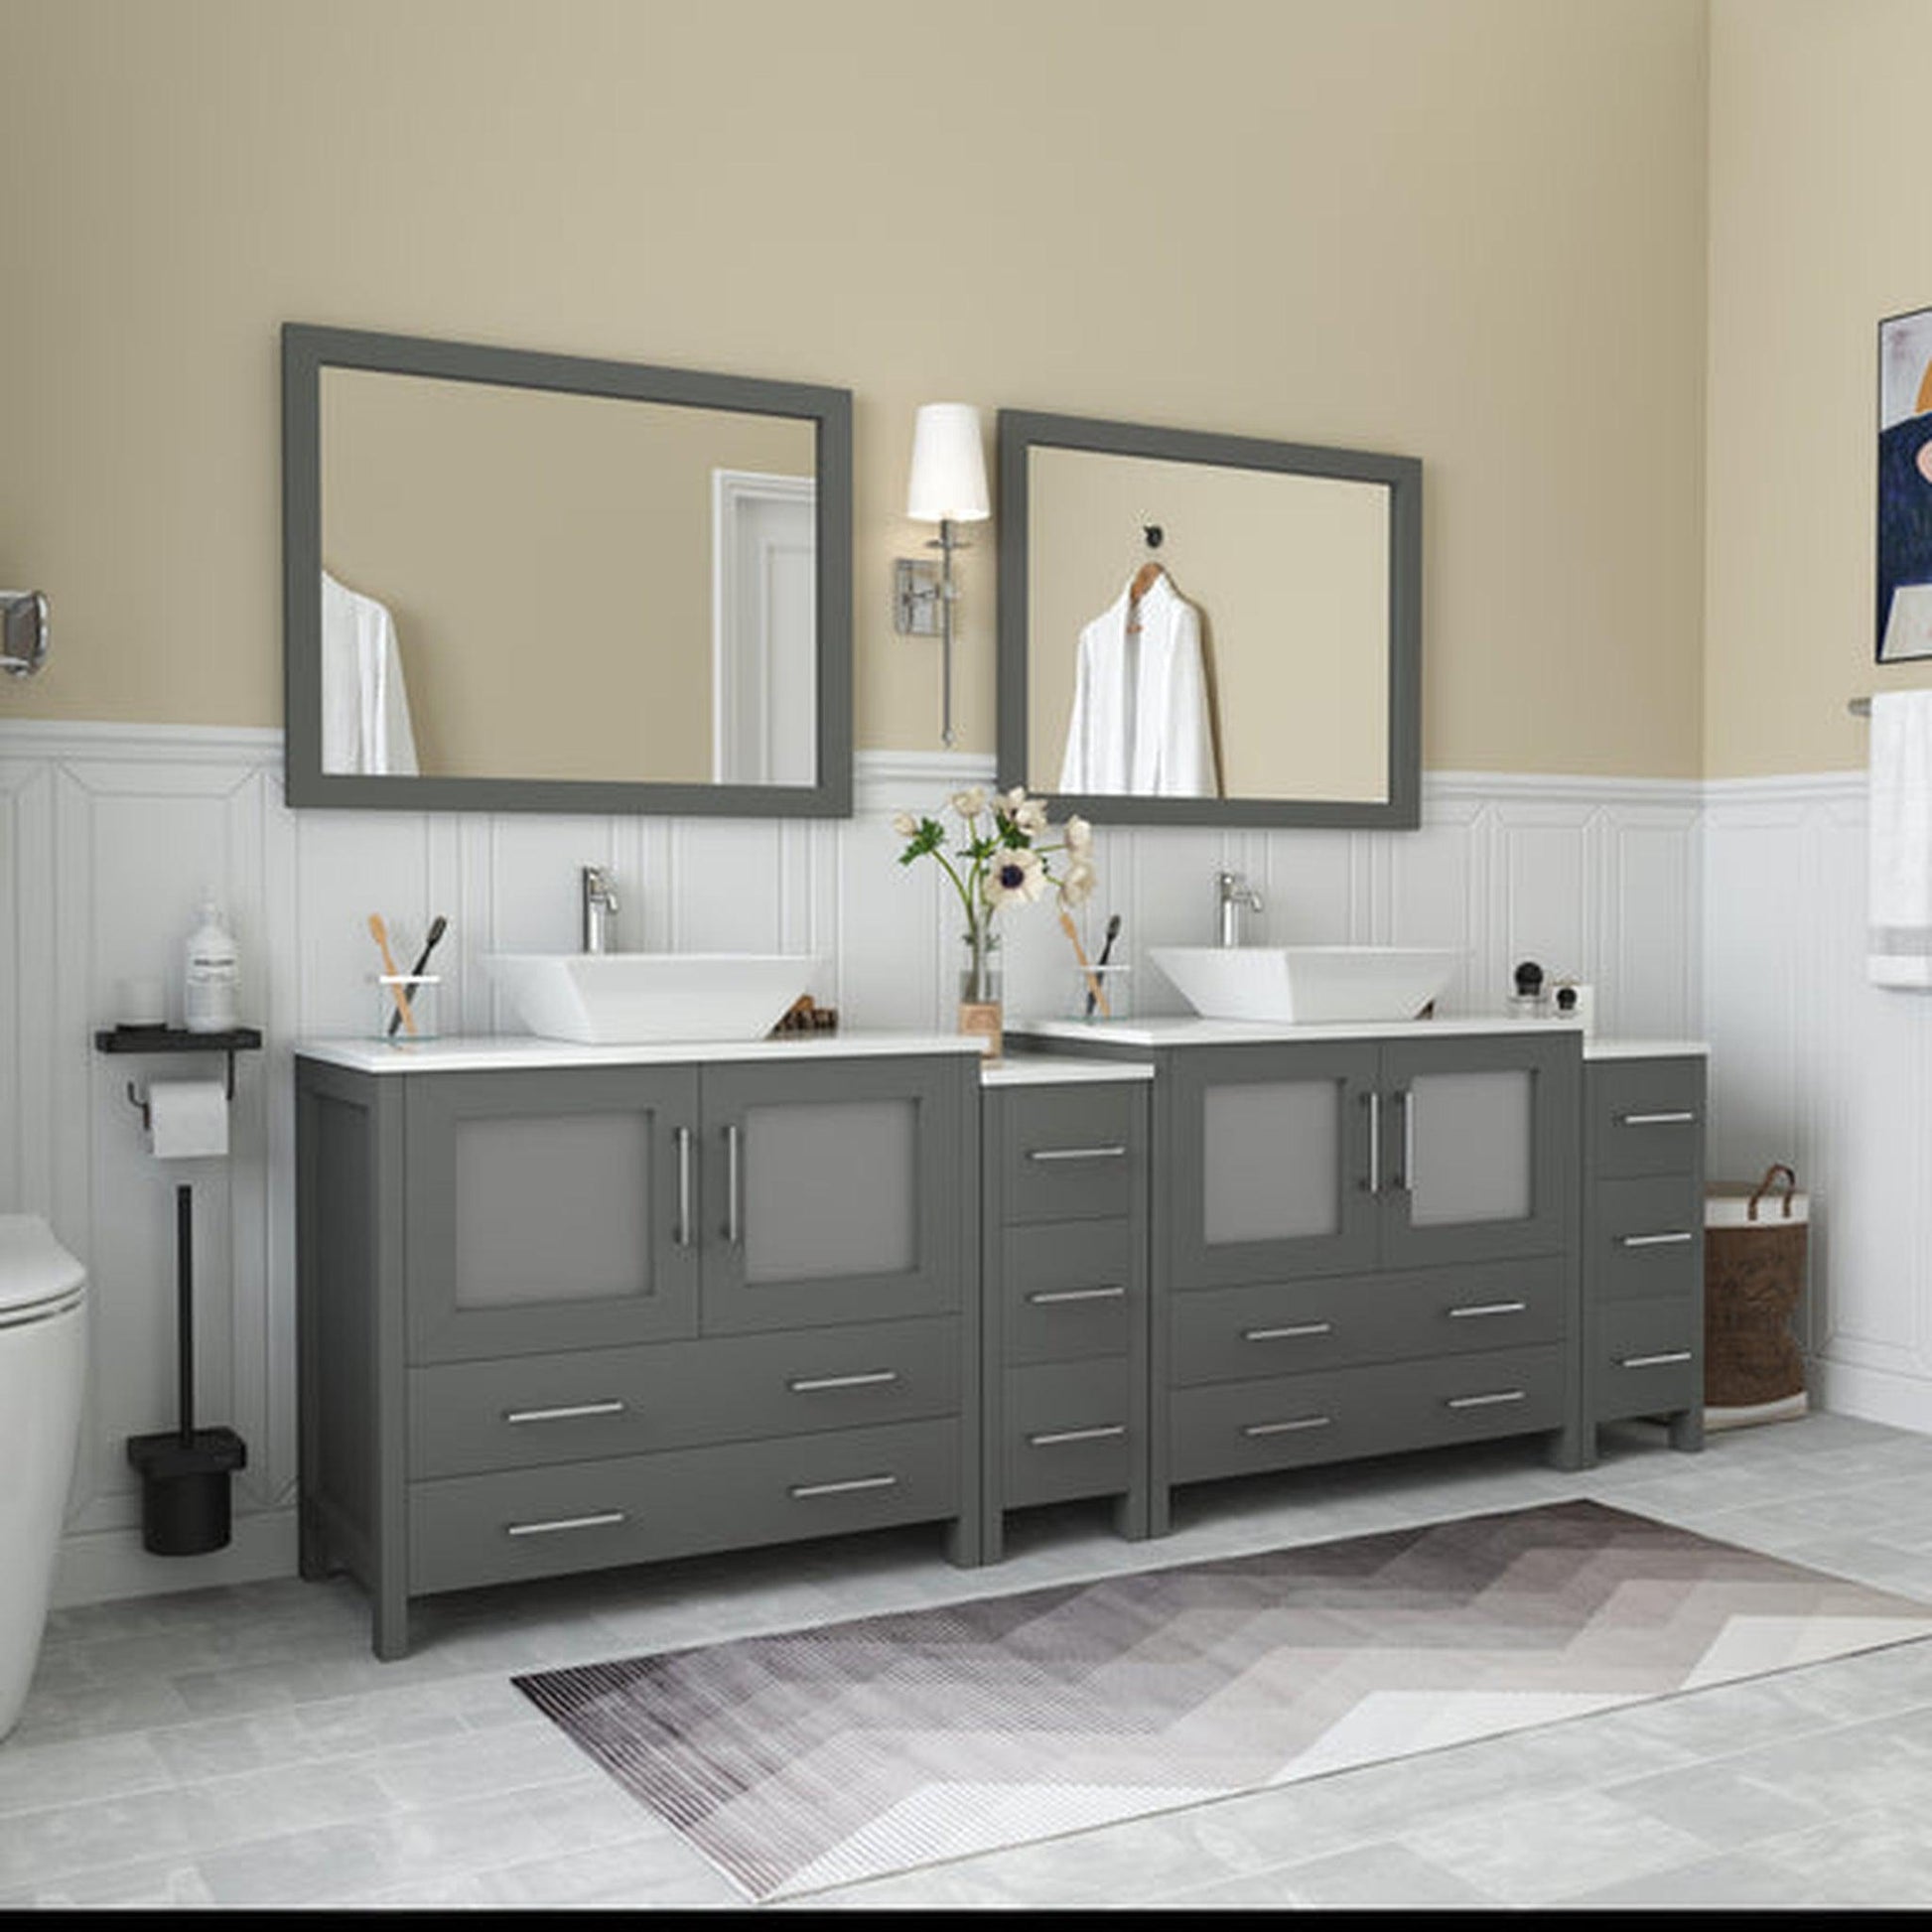 Vanity Art Ravenna 96" Double Gray Freestanding Vanity Set With White Engineered Marble Top, 2 Ceramic Vessel Sinks, 2 Side Cabinets and 2 Mirrors